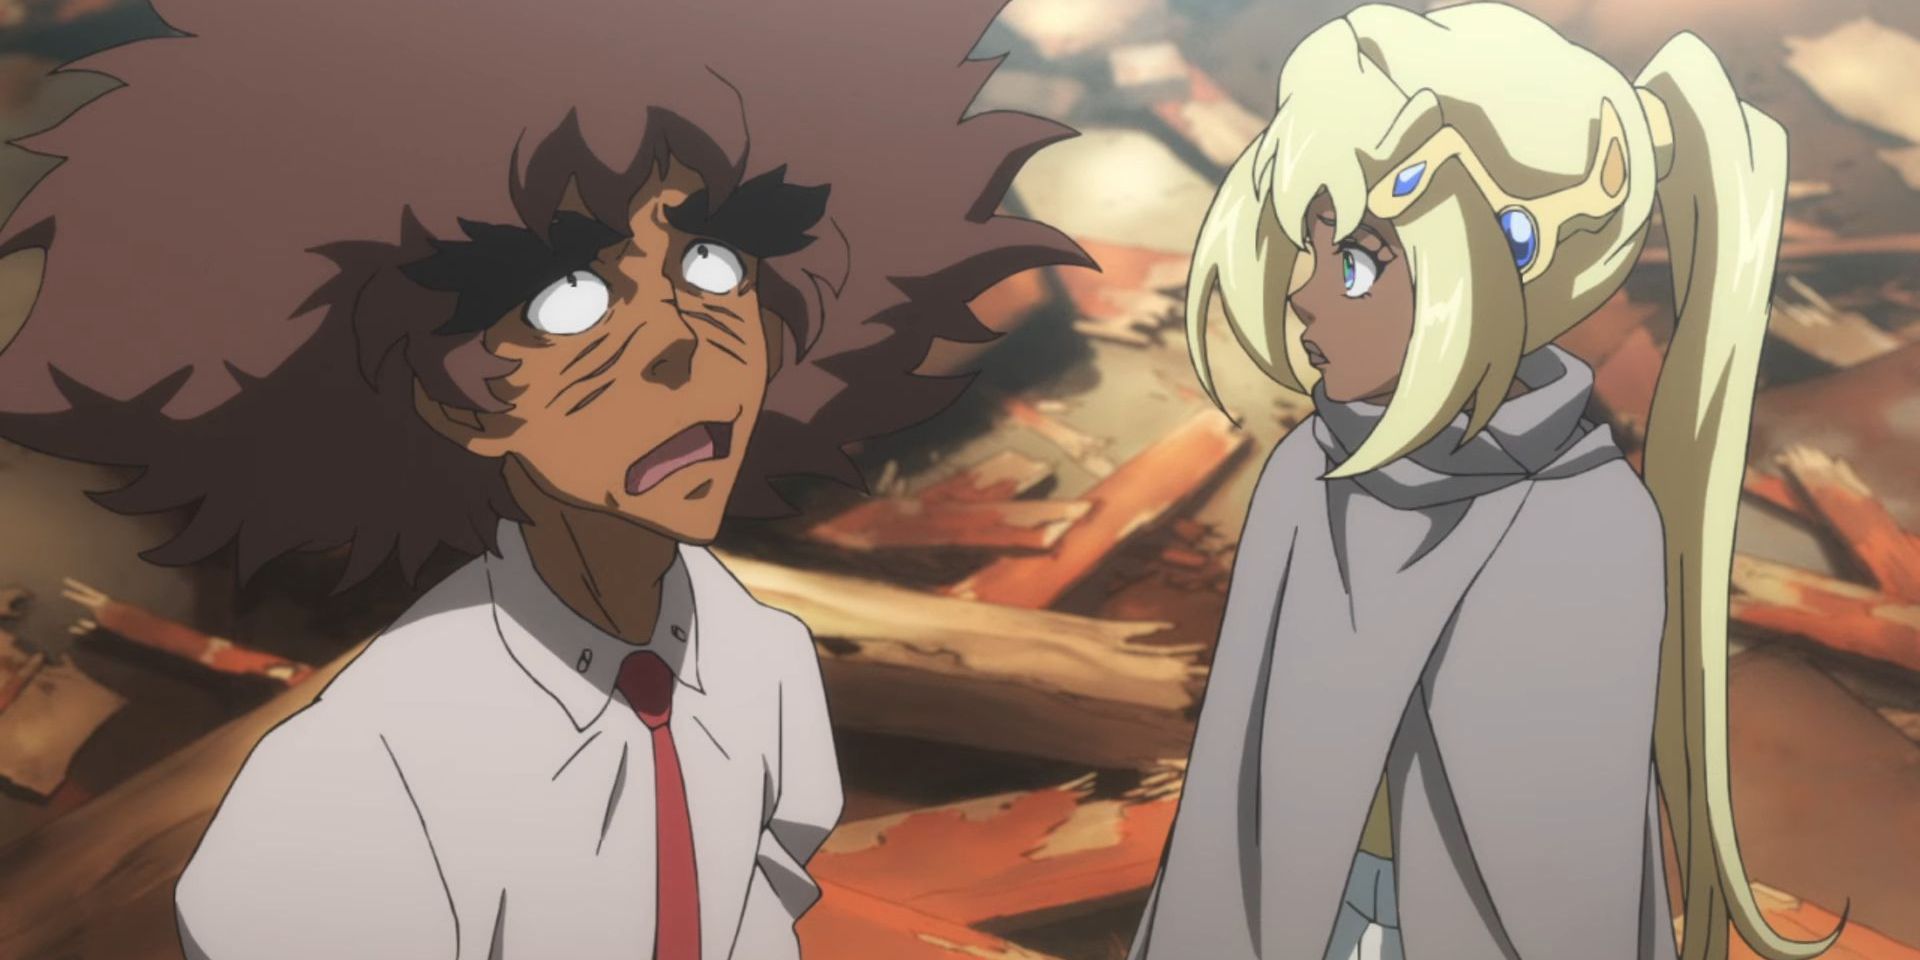 Philly The Kid staring upwards hopelessly in a still from Cannon Busters